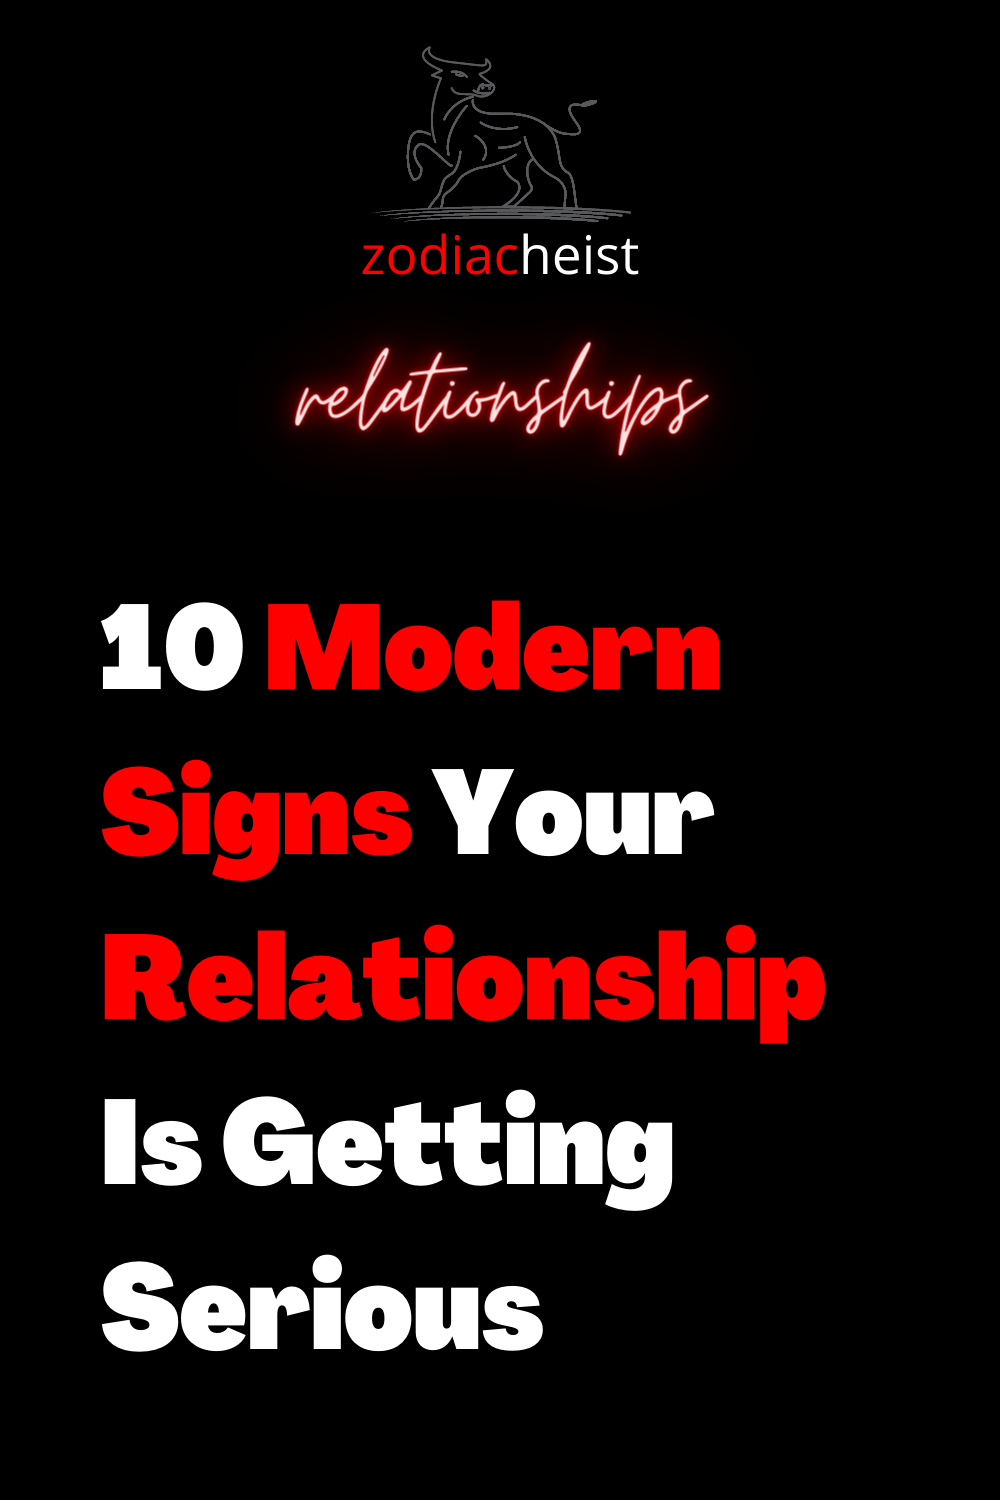 10 Modern Signs Your Relationship Is Getting Serious